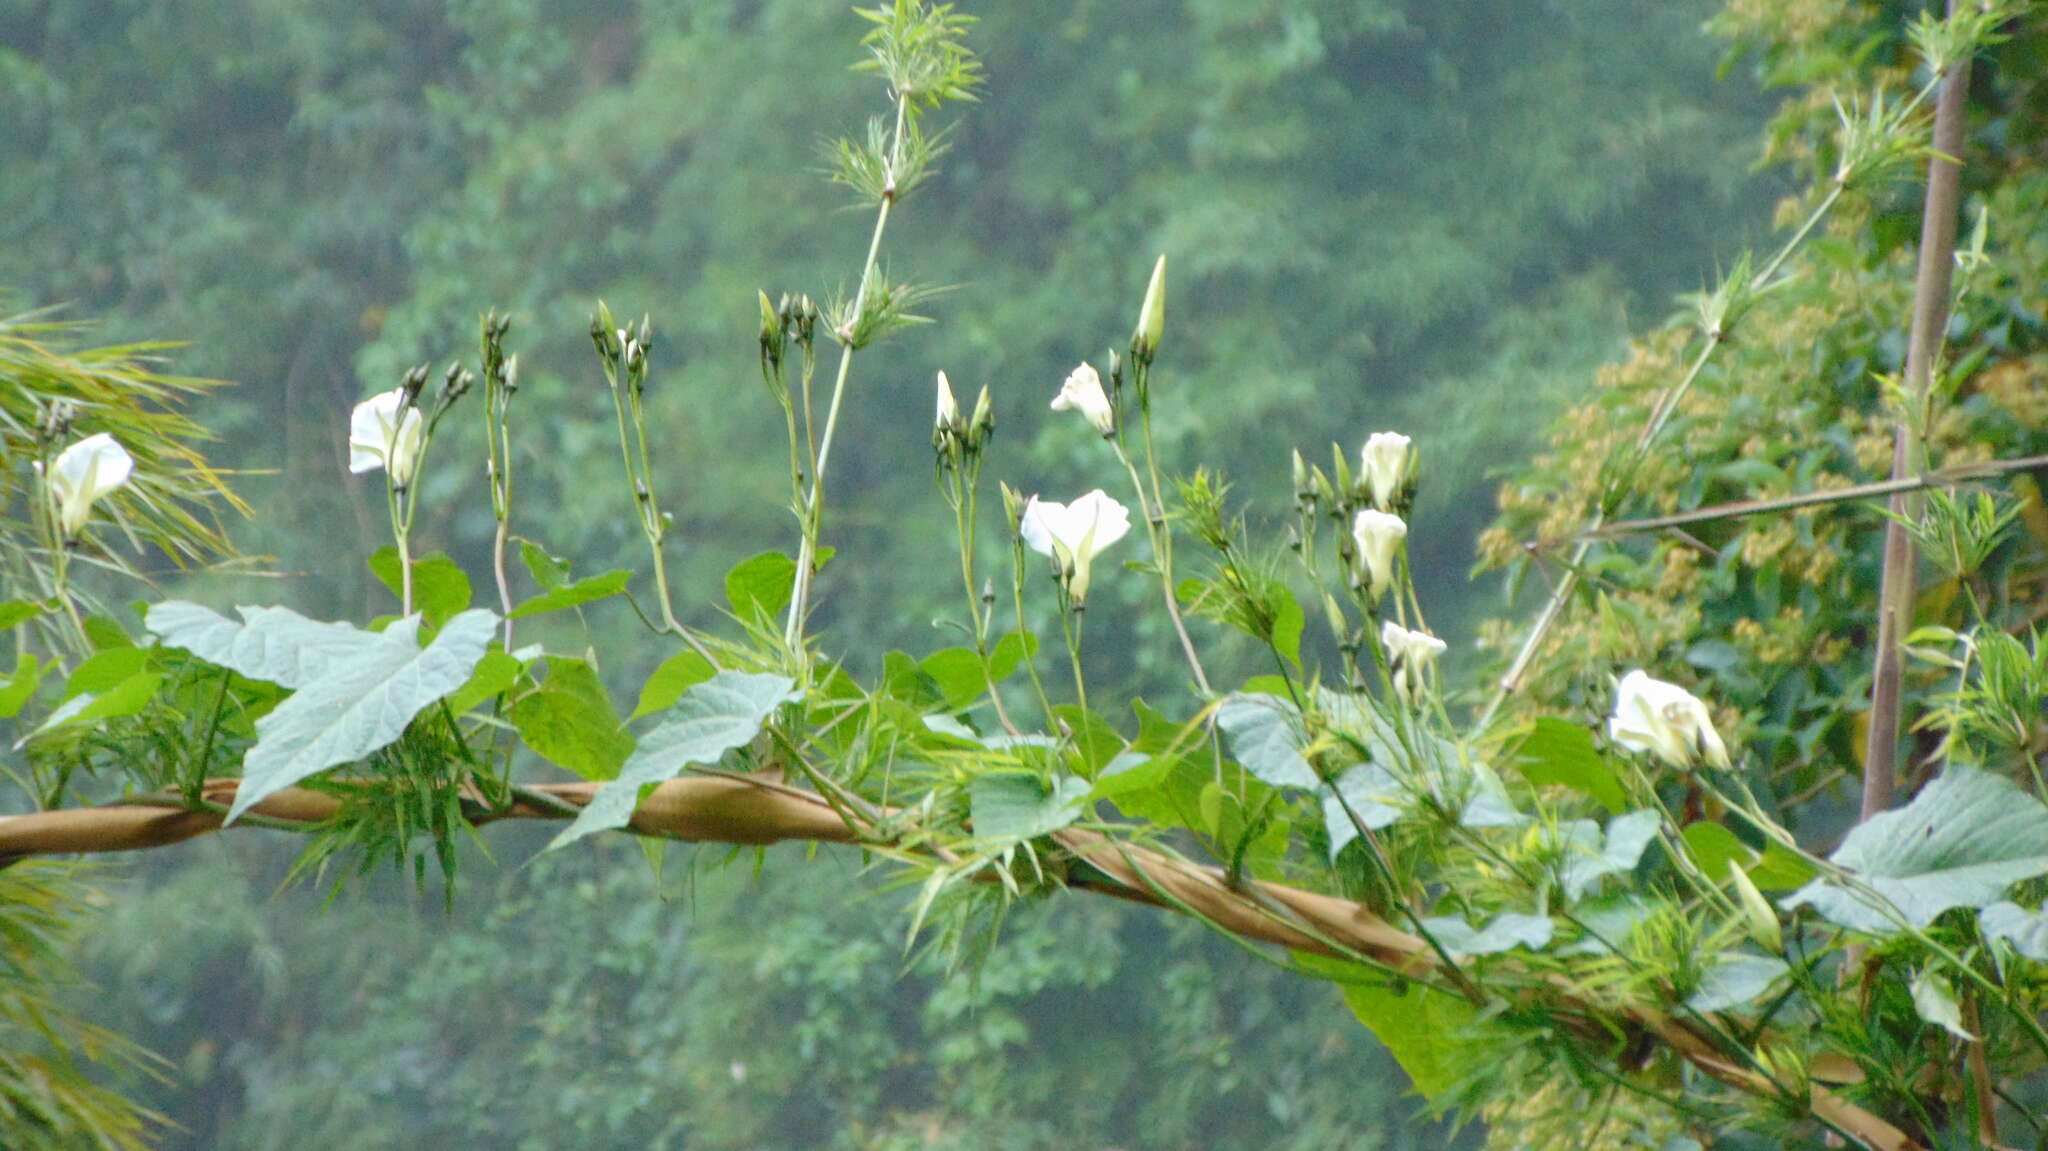 Image of Ipomoea chiriquensis Standl.